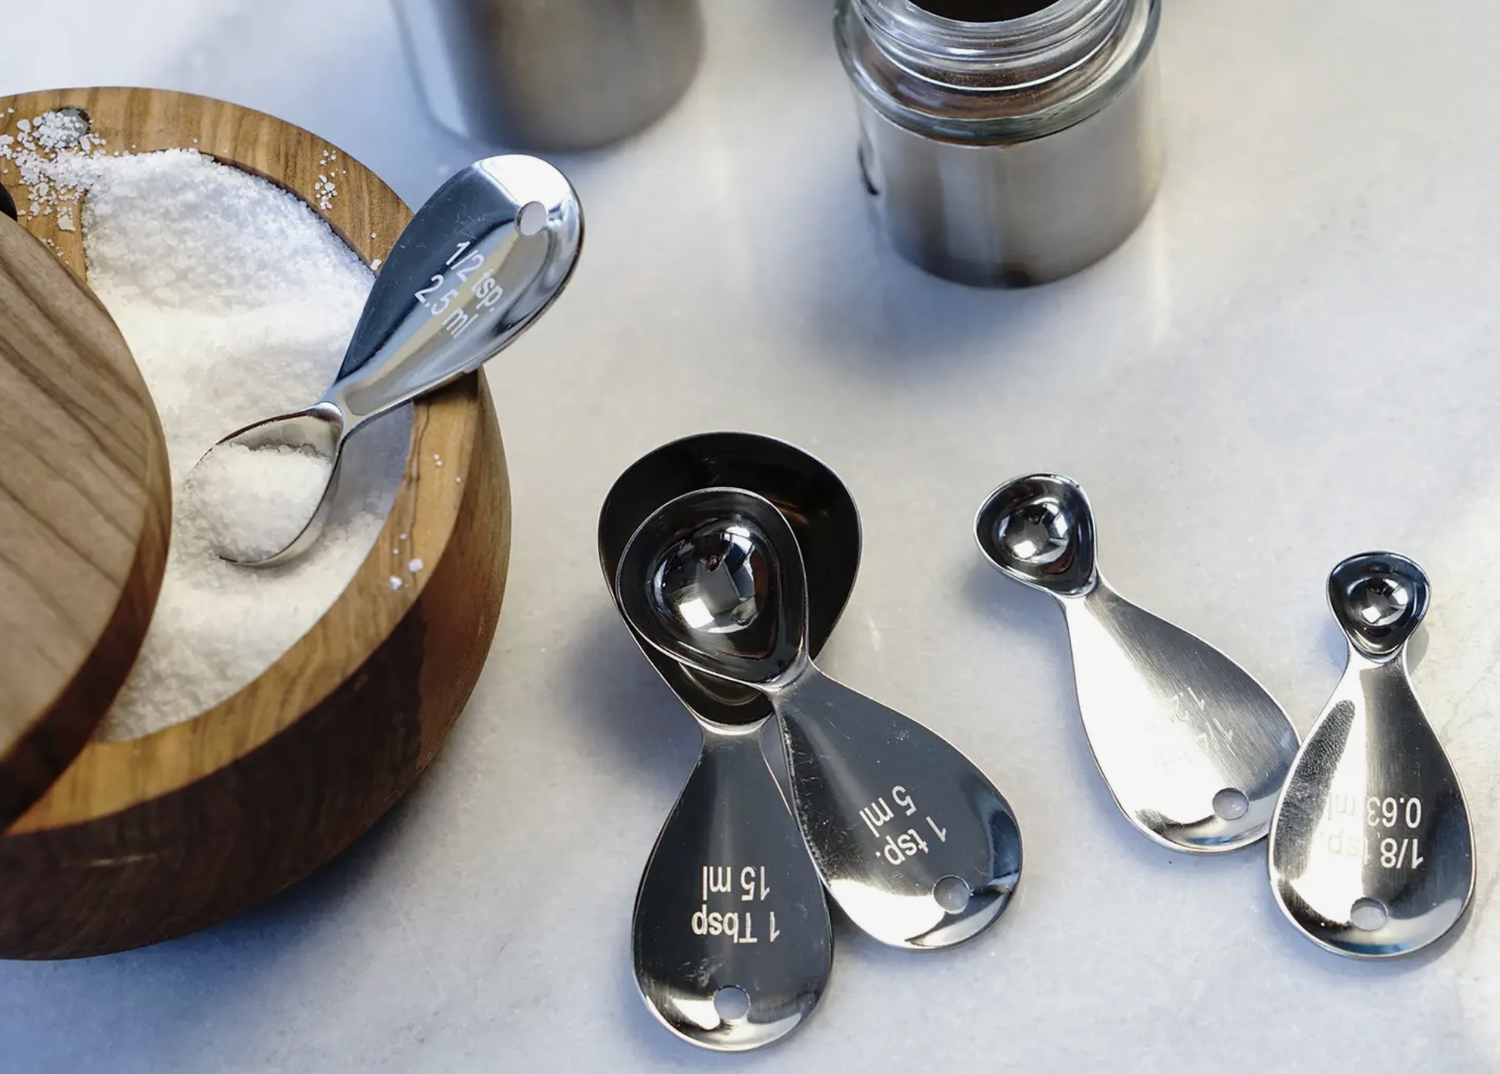 Measuring Cups And Spoons Set, Tablespoon, Measuring Spoons And